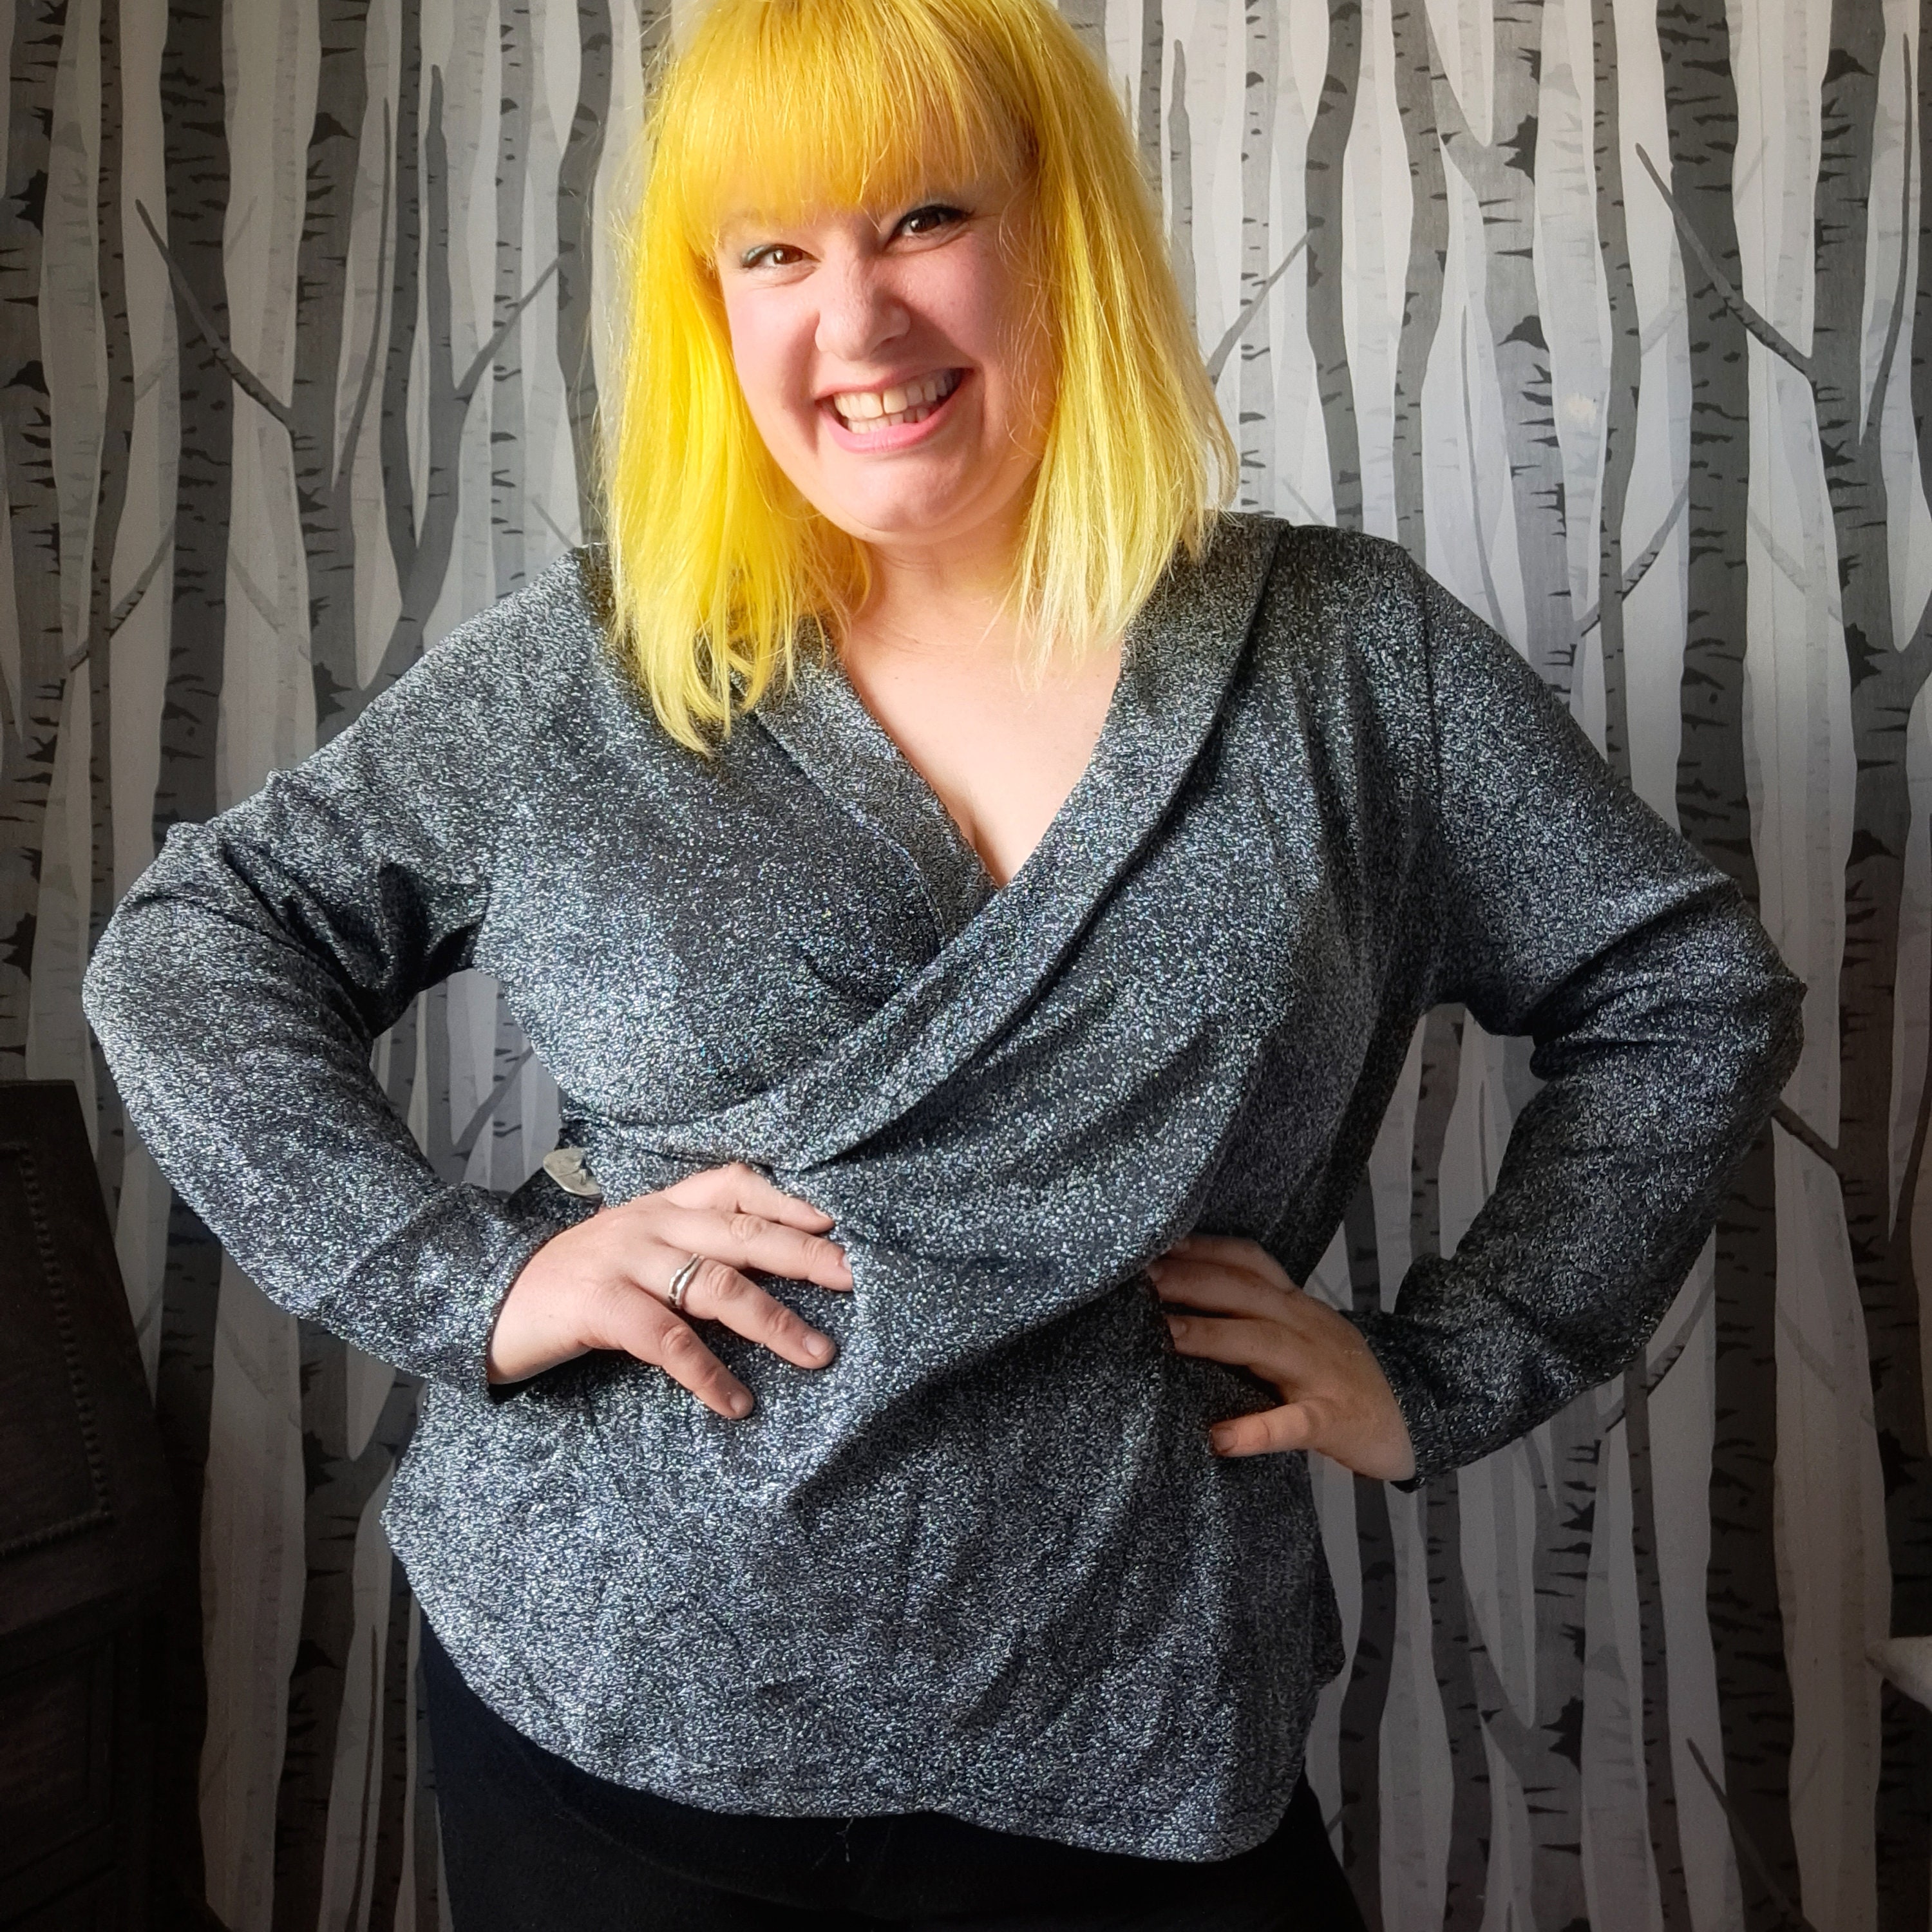 Plus Size Vintage 90s Shiny Silver Top. 1990s Crossover Top in Glitter  Silver With a Decorative Button. UK Size 18 -  UK